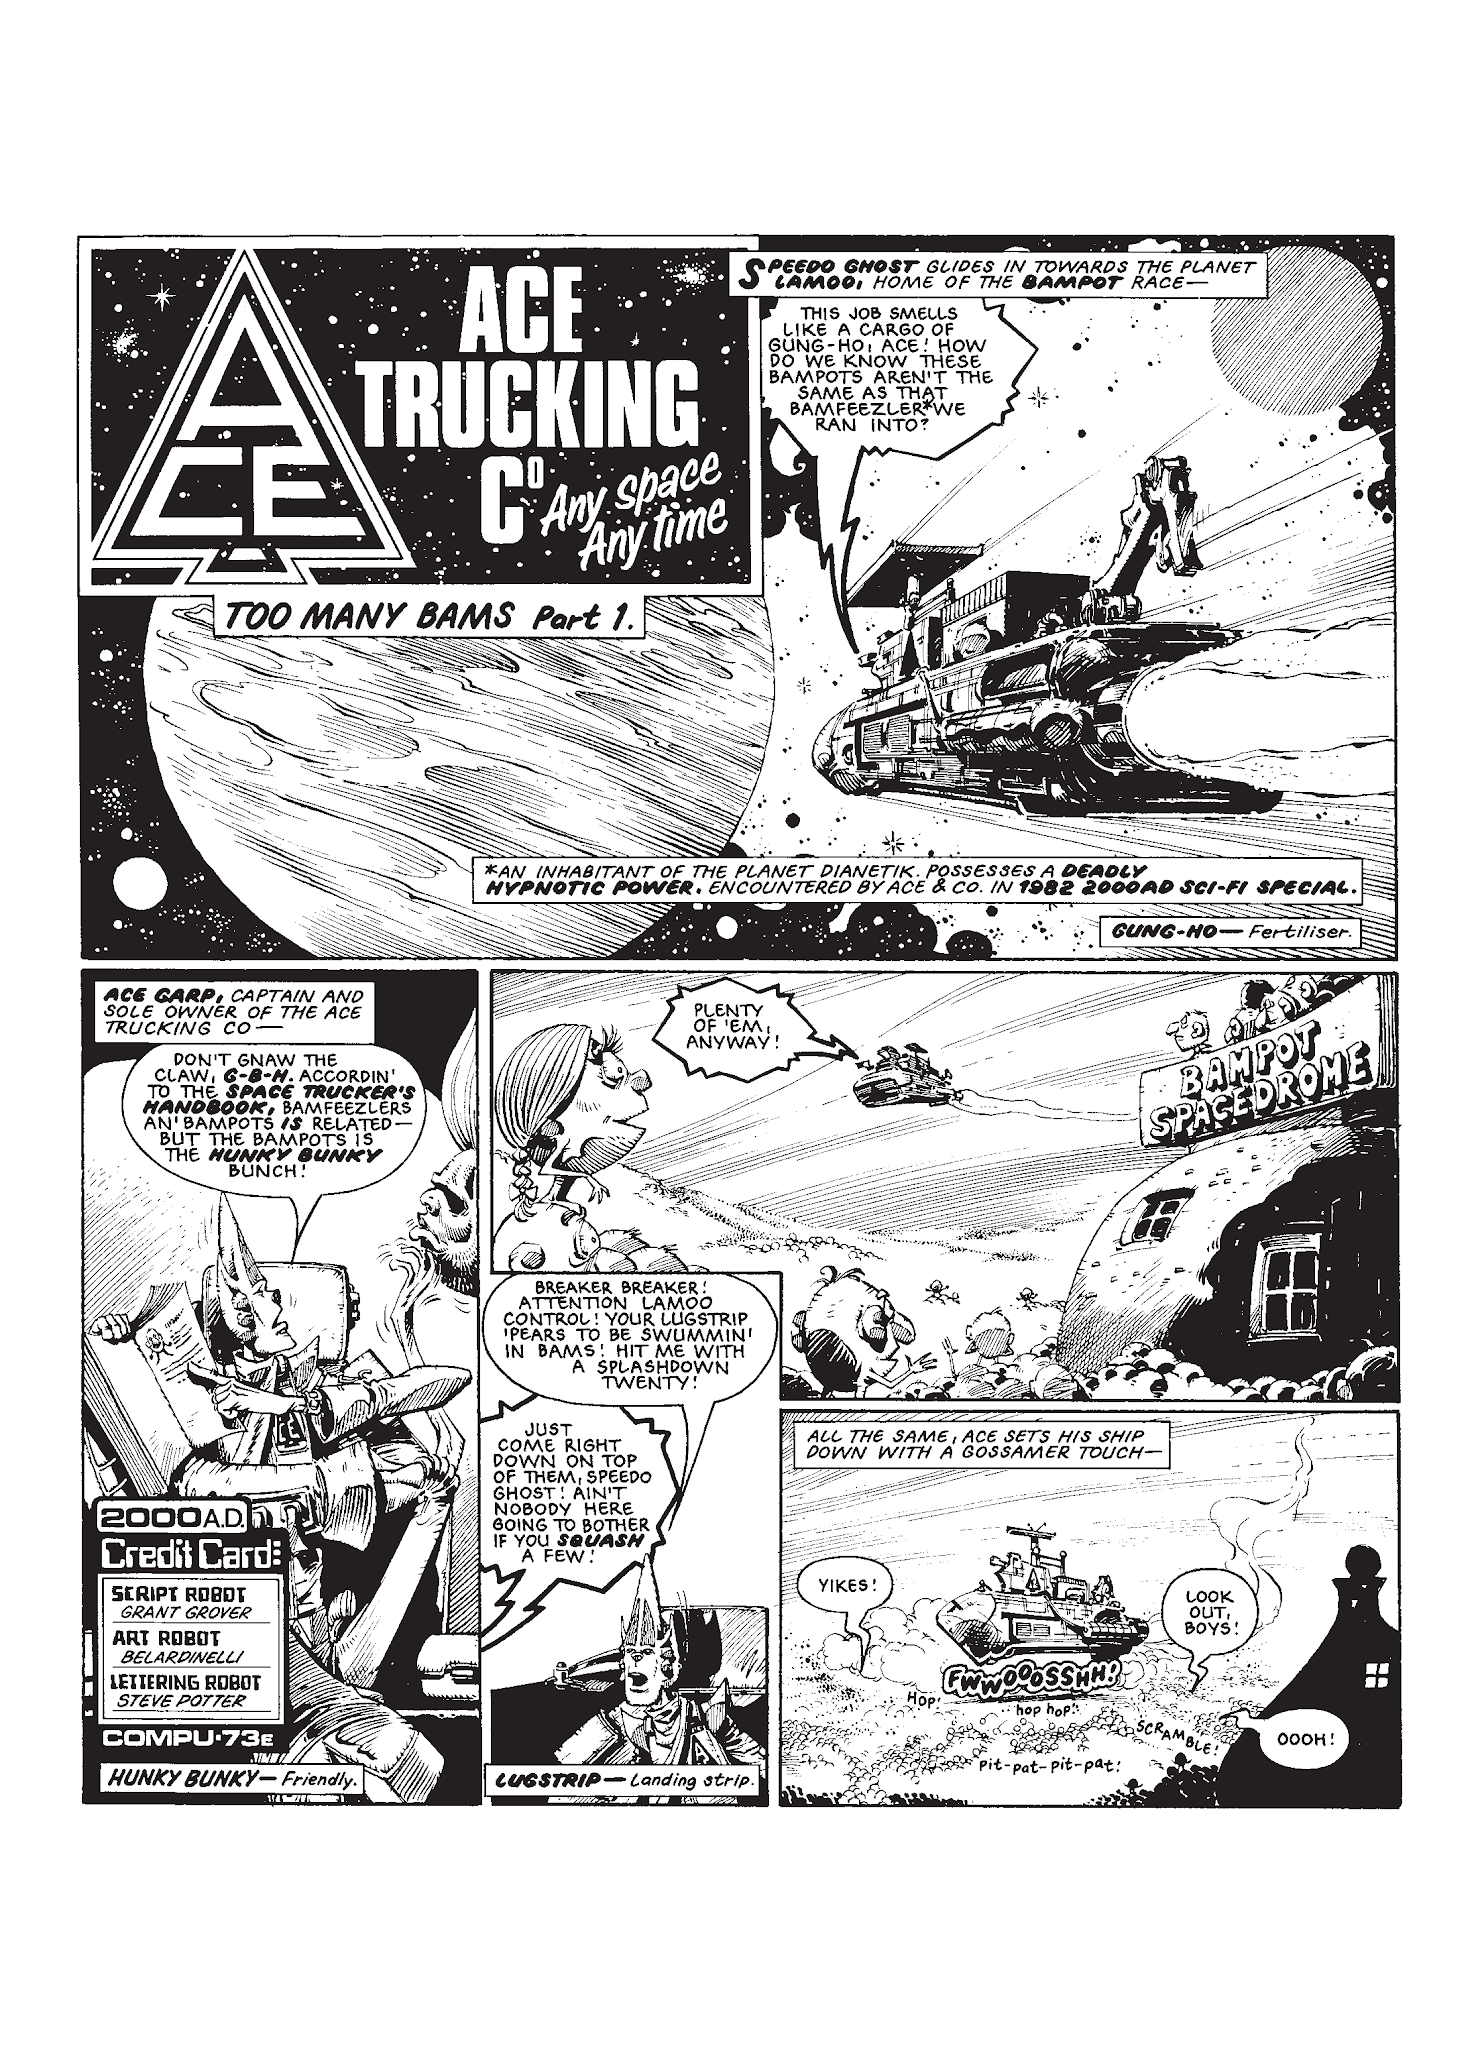 Read online The Complete Ace Trucking Co. comic -  Issue # TPB 1 - 199